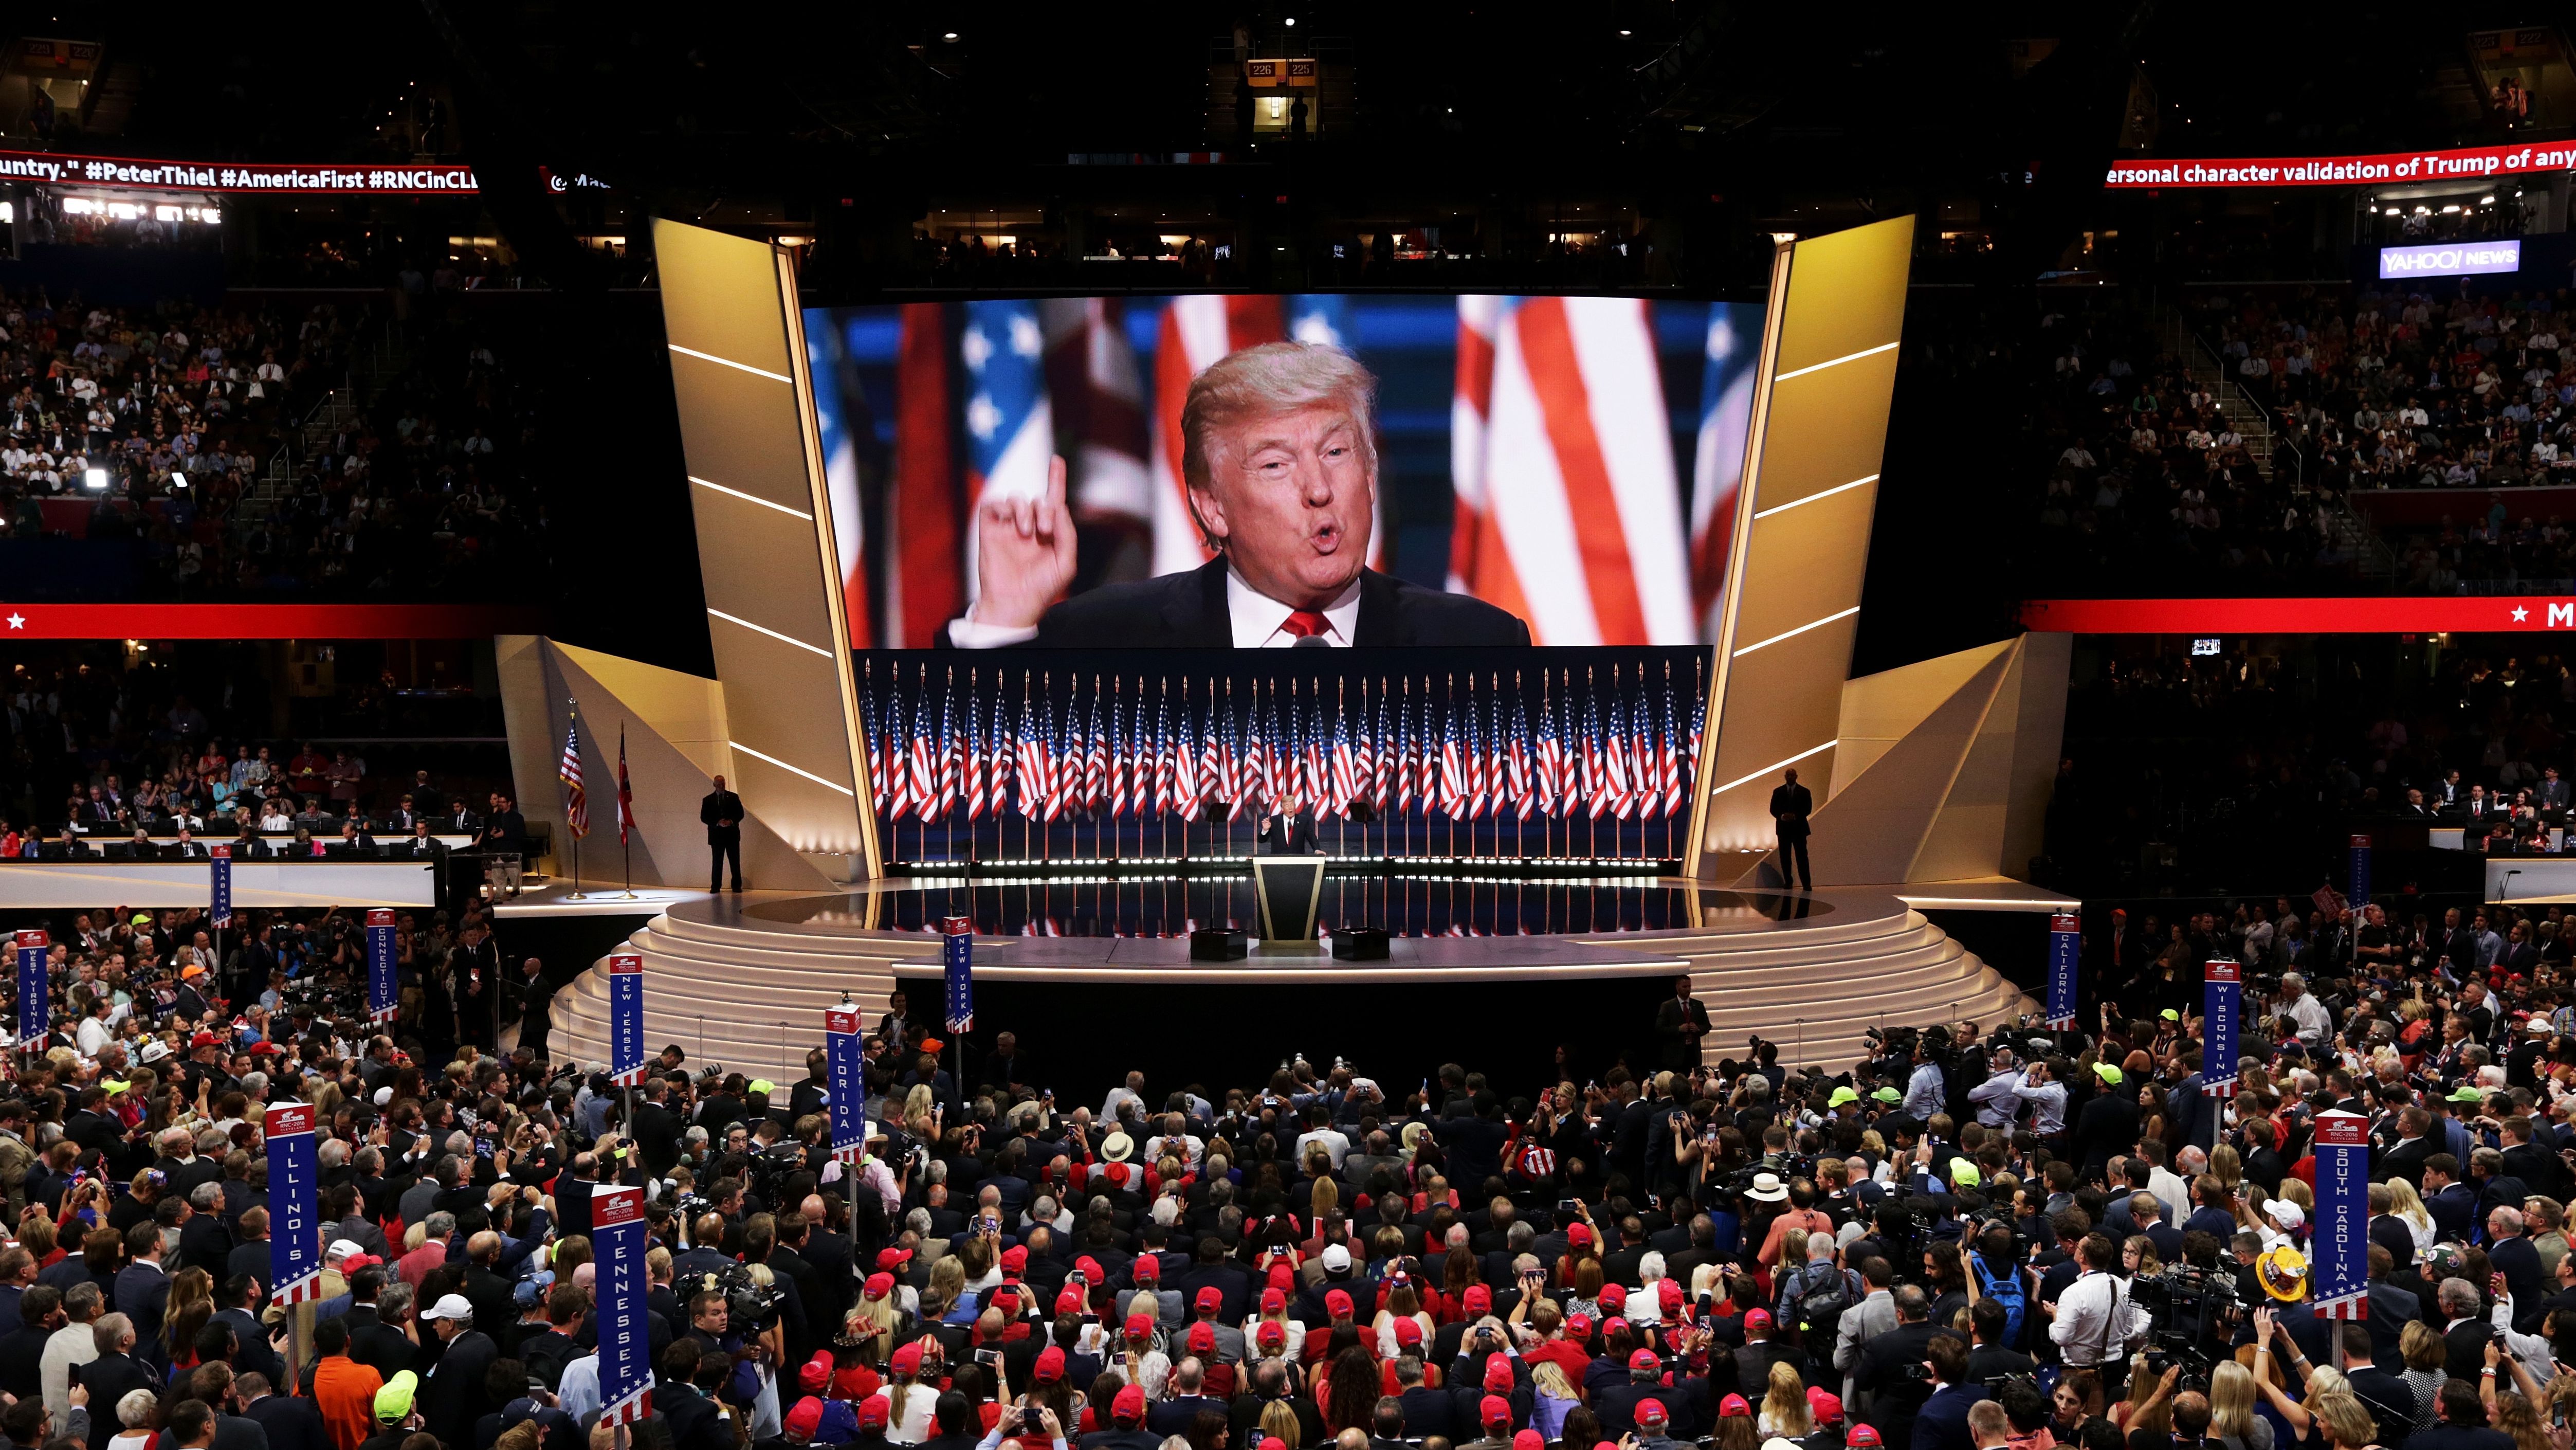 Republican presidential candidate Donald Trump delivers a speech during the evening session on the fourth day of the Republican National Convention on July 21, 2016, at the Quicken Loans Arena in Cleveland, Ohio. 